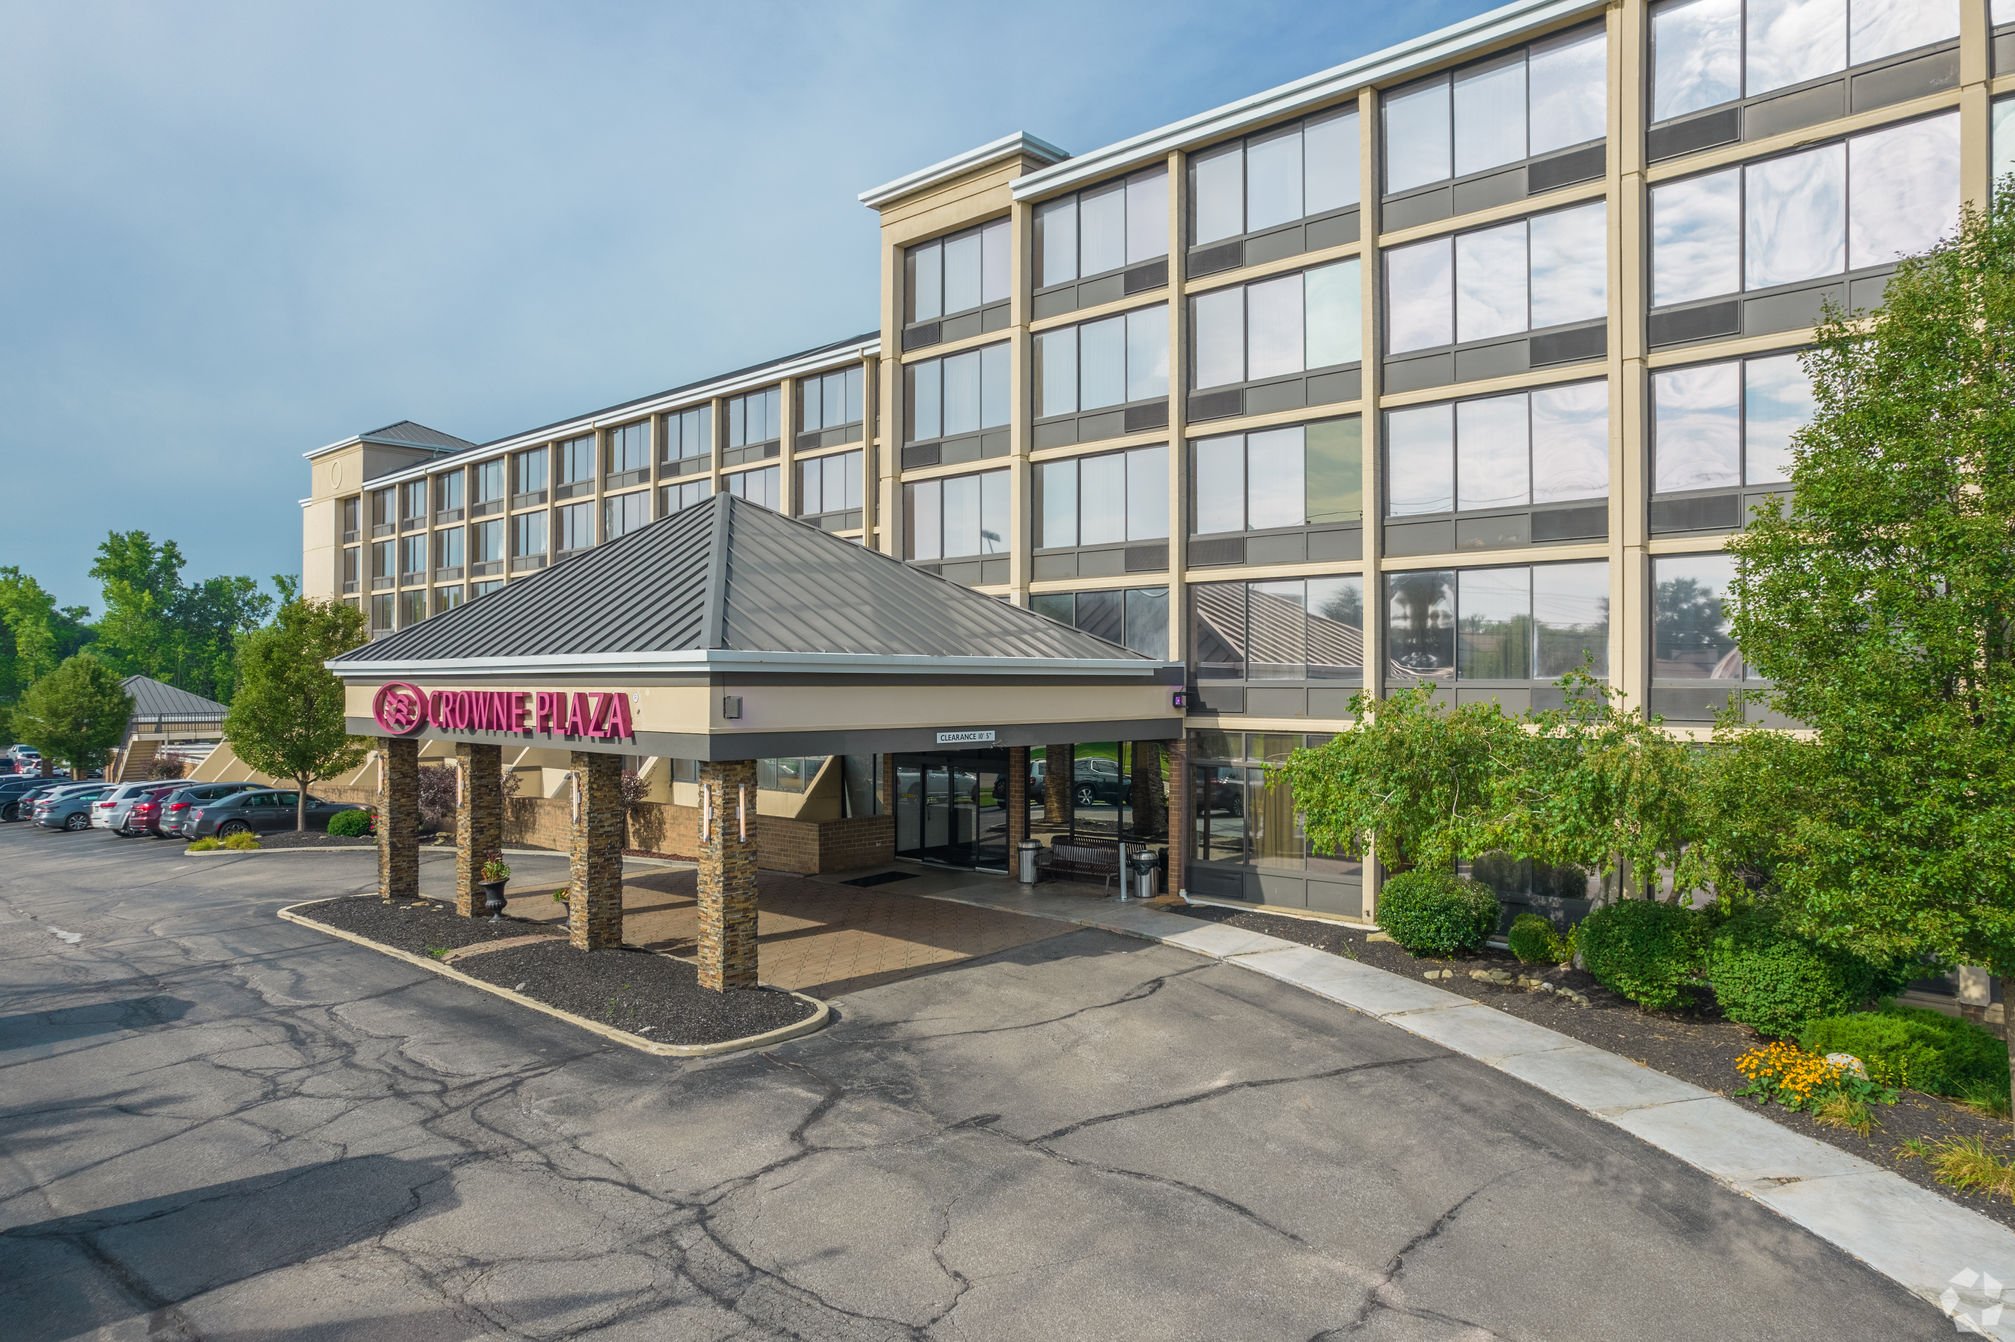 Crowne Plaza in Middleburg Heights sells for $8.75 million